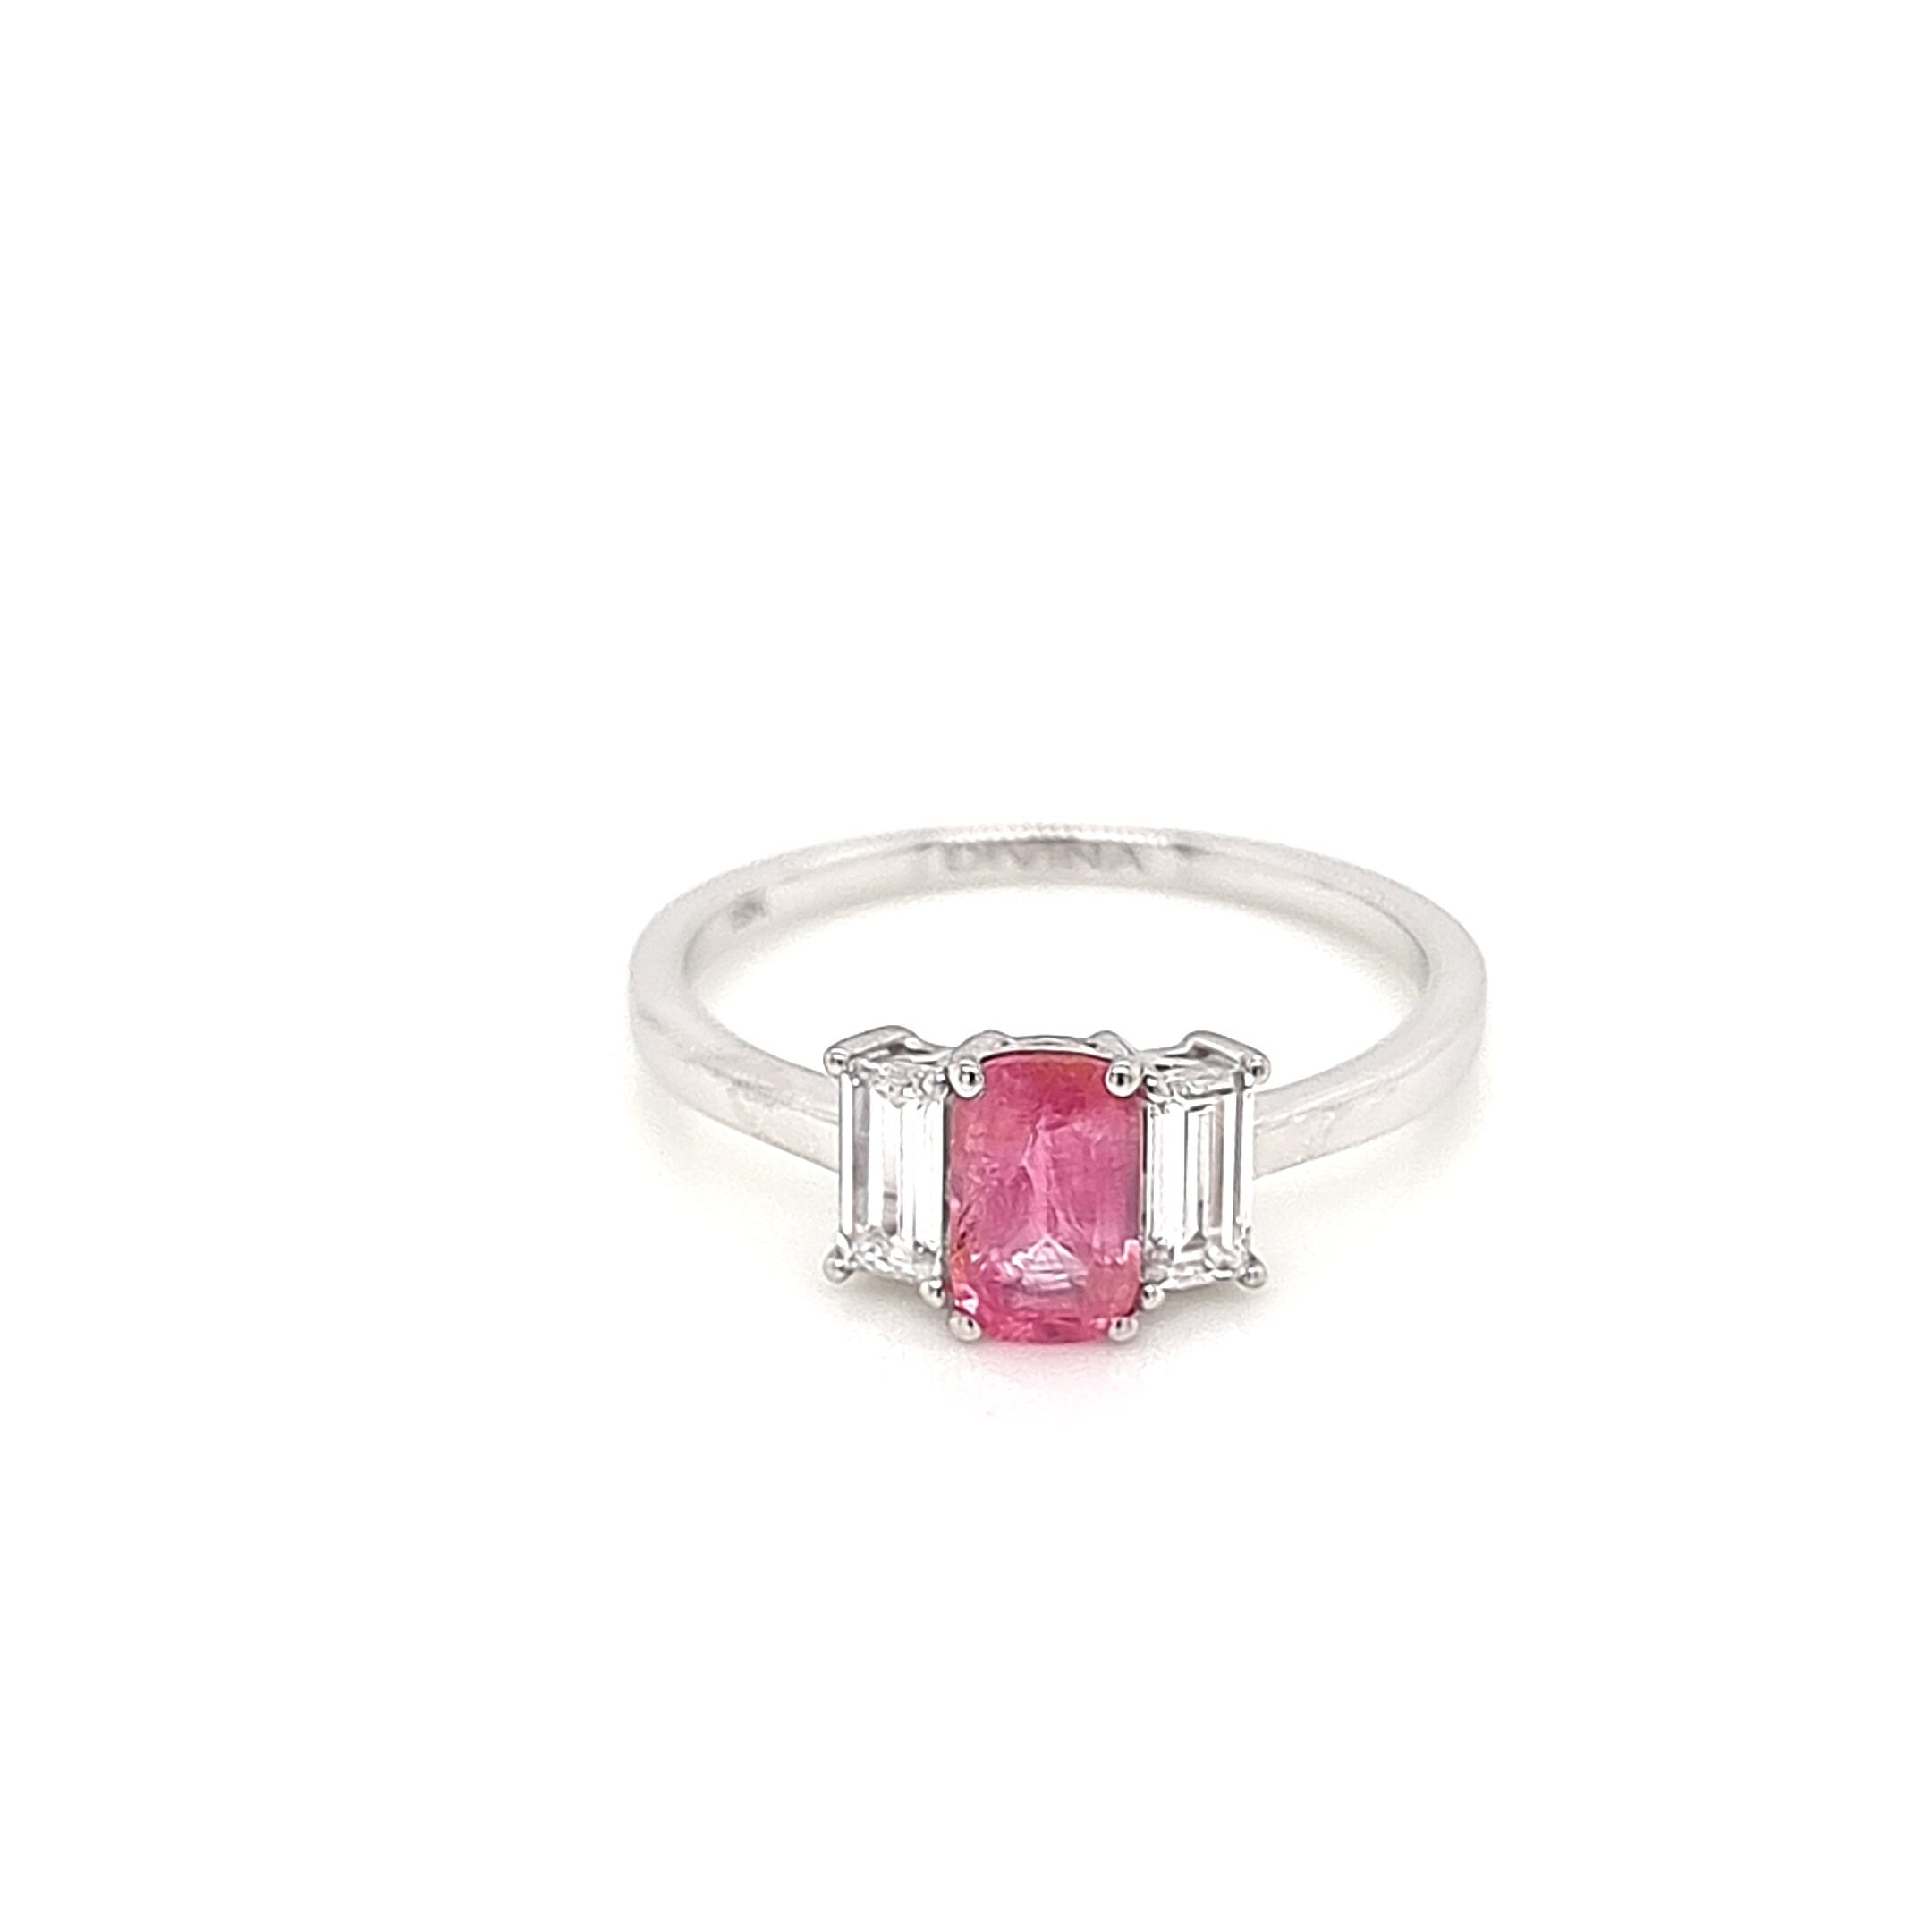 18K White Gold Trilogy Ring with Diamonds and Pink Spinel